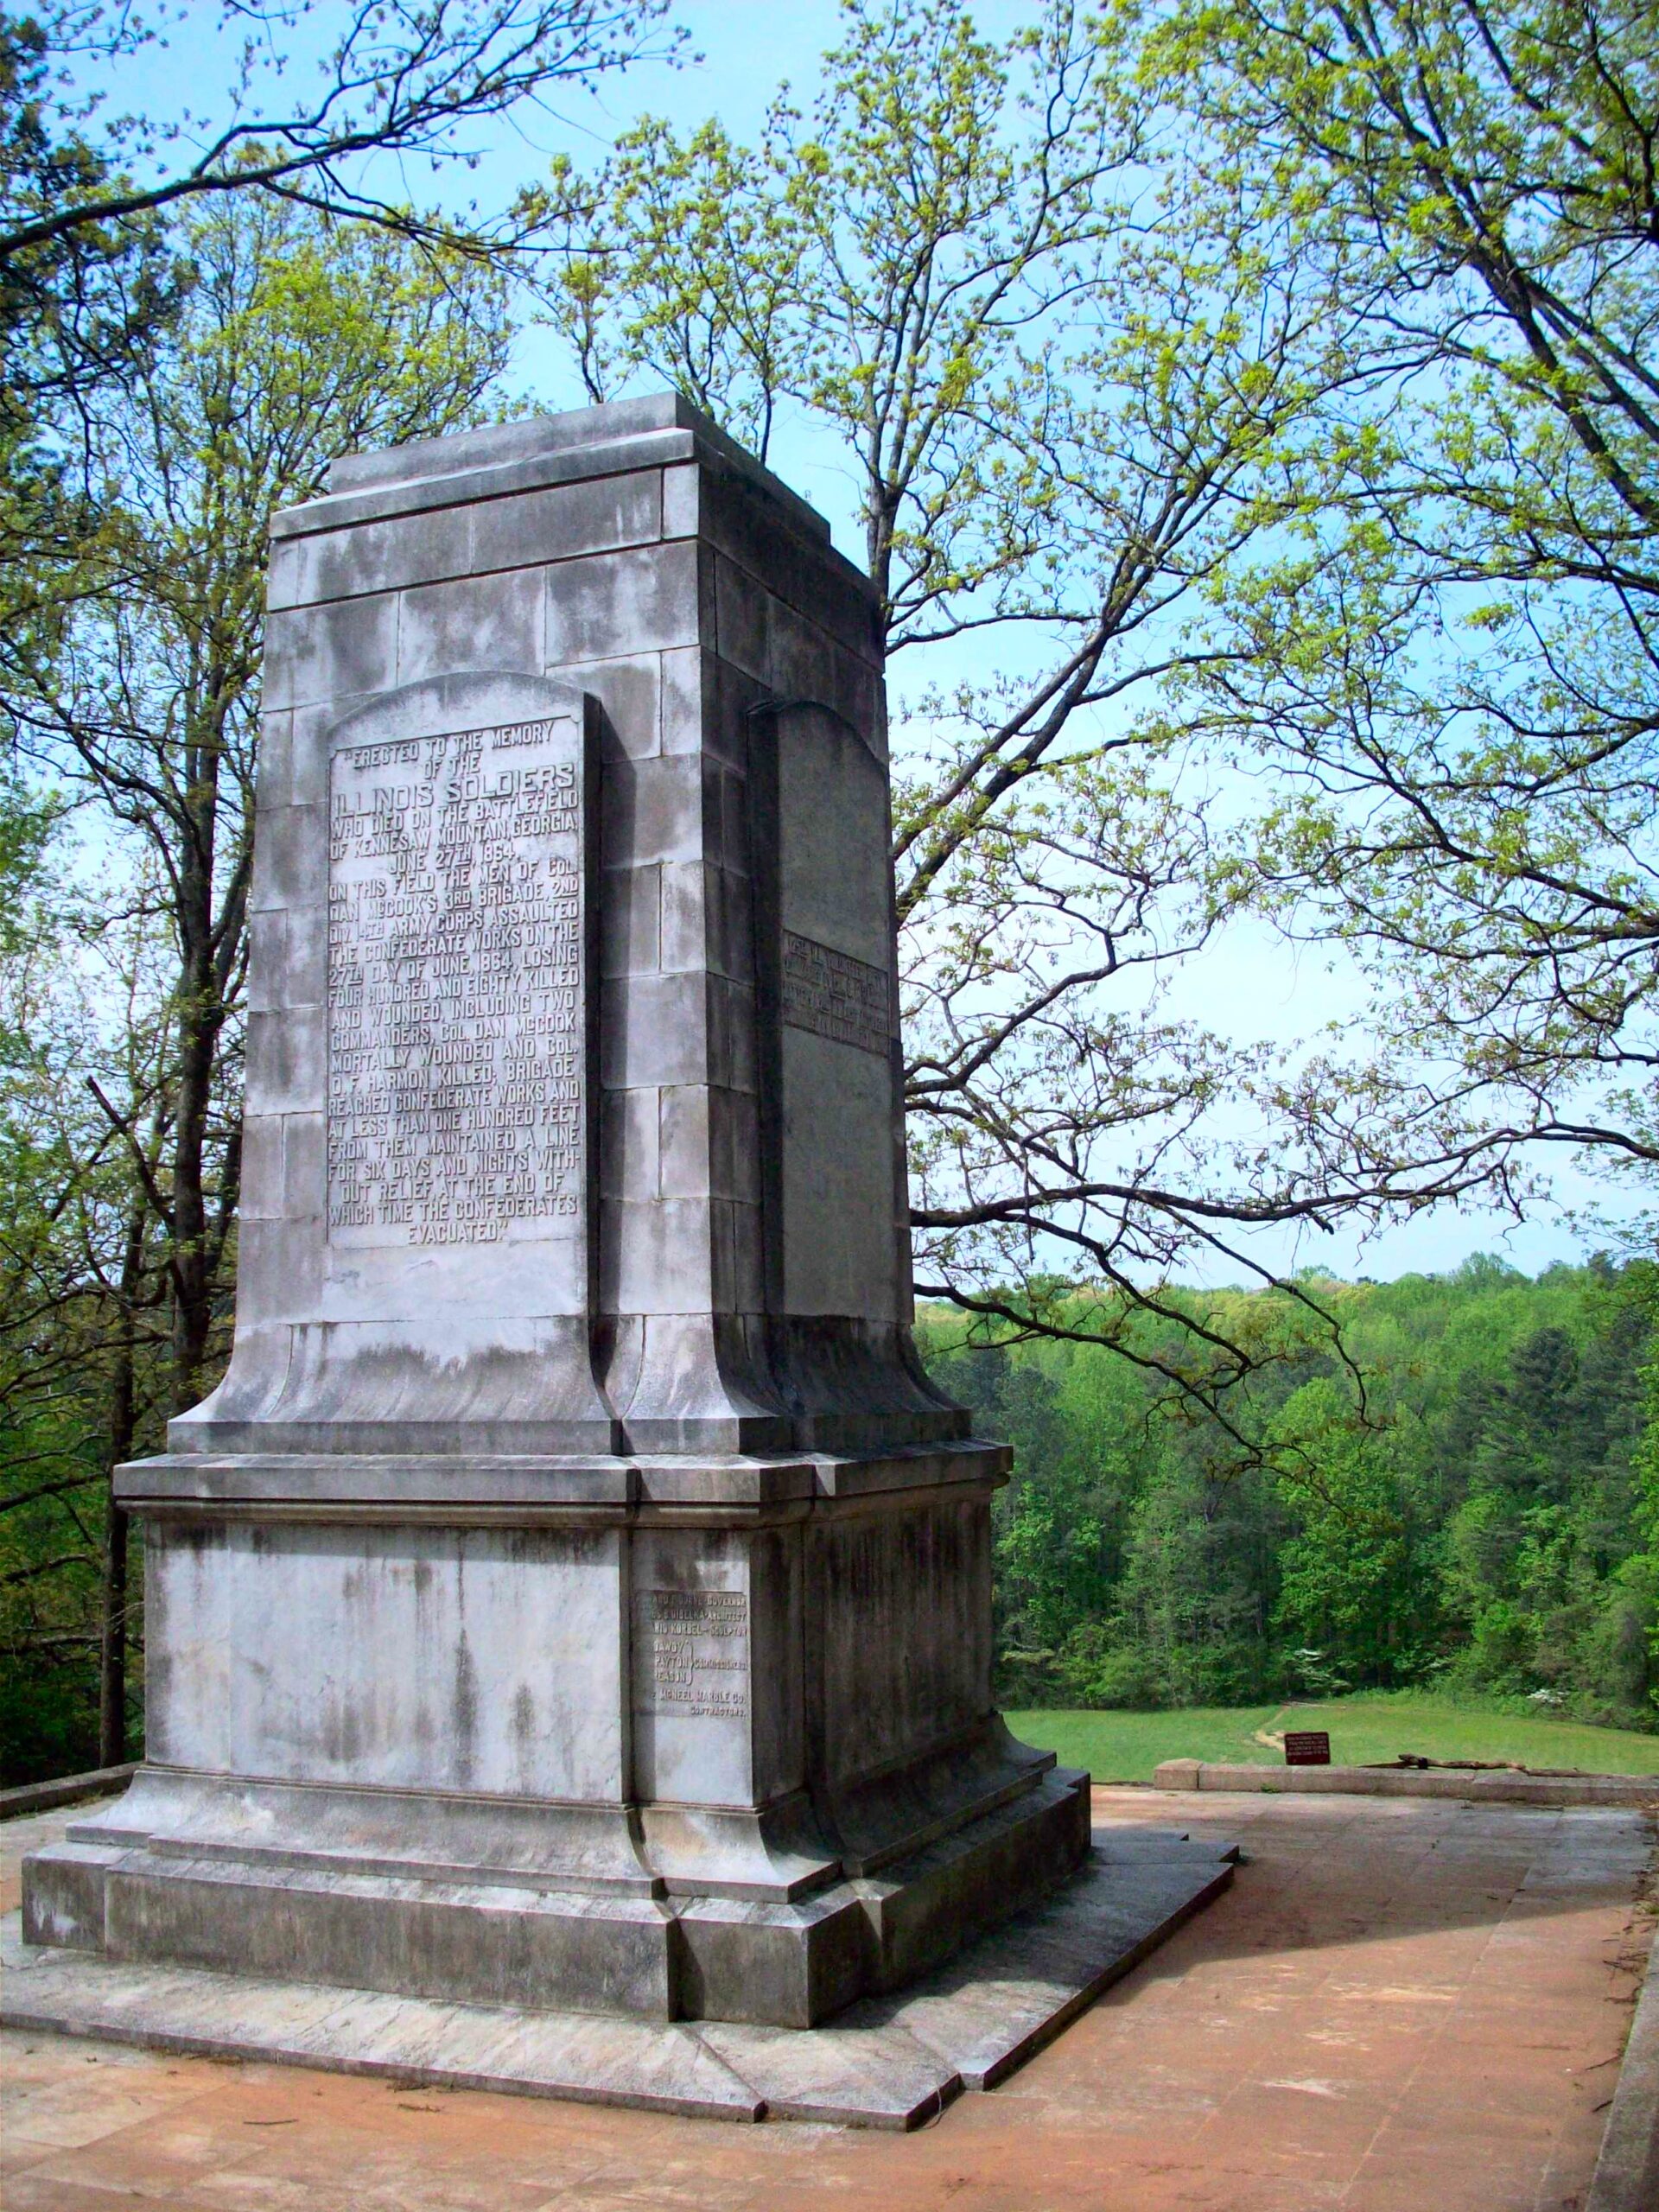 A monument sits in the middle of a wooded area.